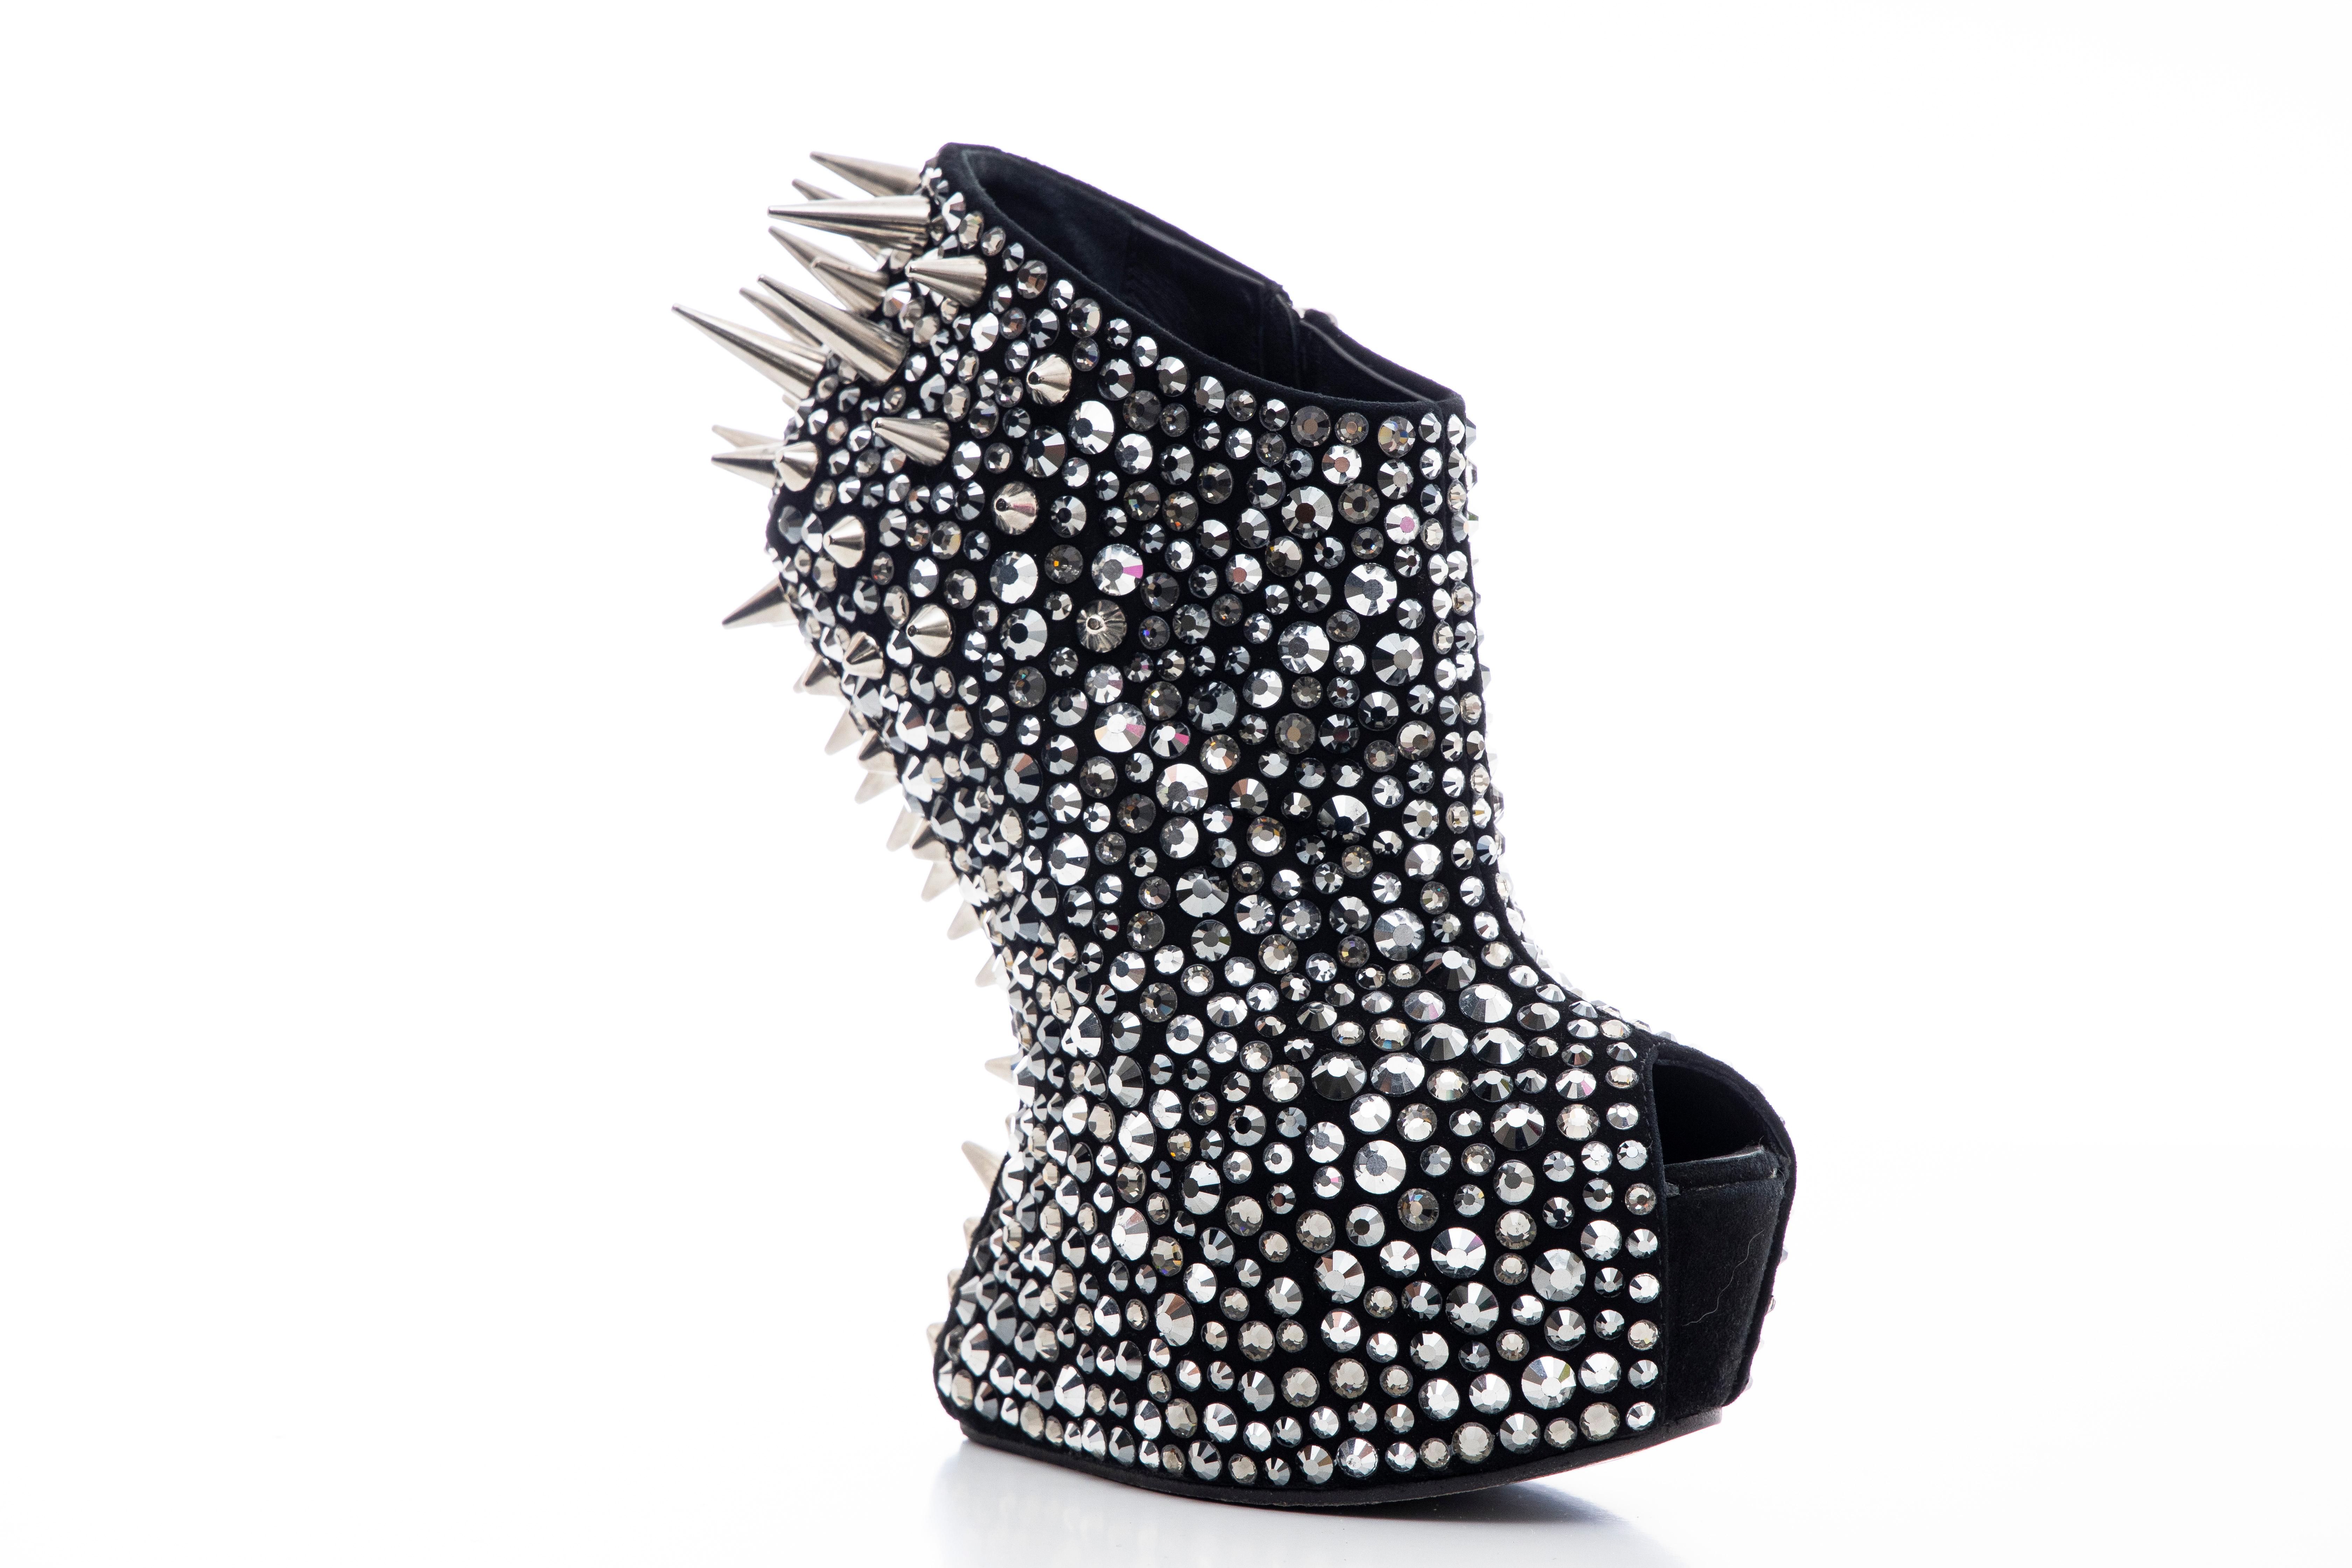 Giuseppe Zanotti, Autumn-Winter 2012, black suede platform ankle boots with strass adornments throughout, silver-tone spikes at counters, covered heels, and zip closure at insteps

Part of The Bata Shoe Museum in Gold Spikes.

Quote from The Bata